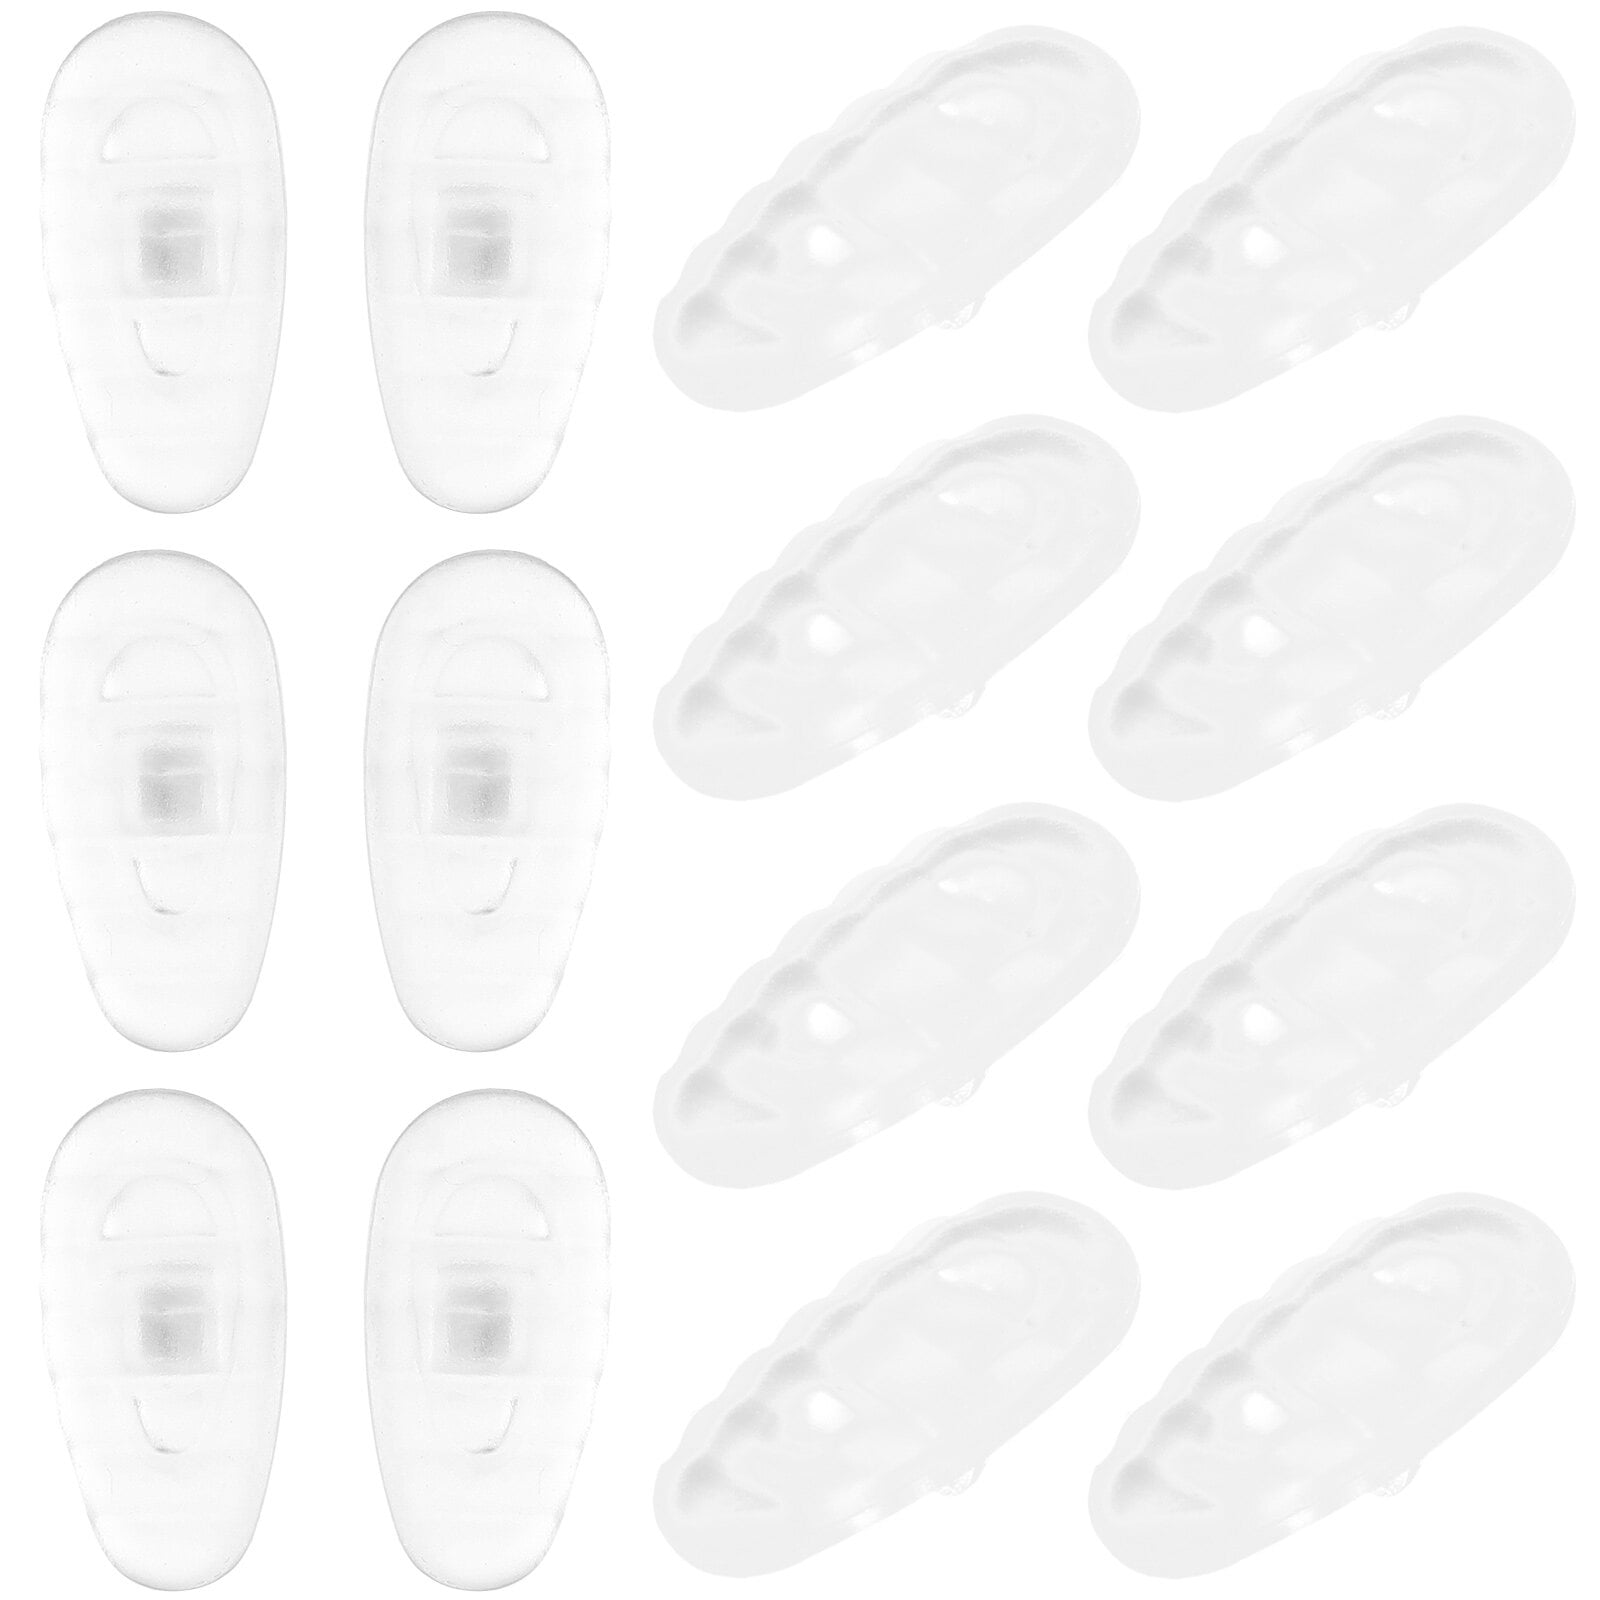 20 Pairs of Eyeglass Nose Pads Silicone Nose Pads Glasses Replacement ...